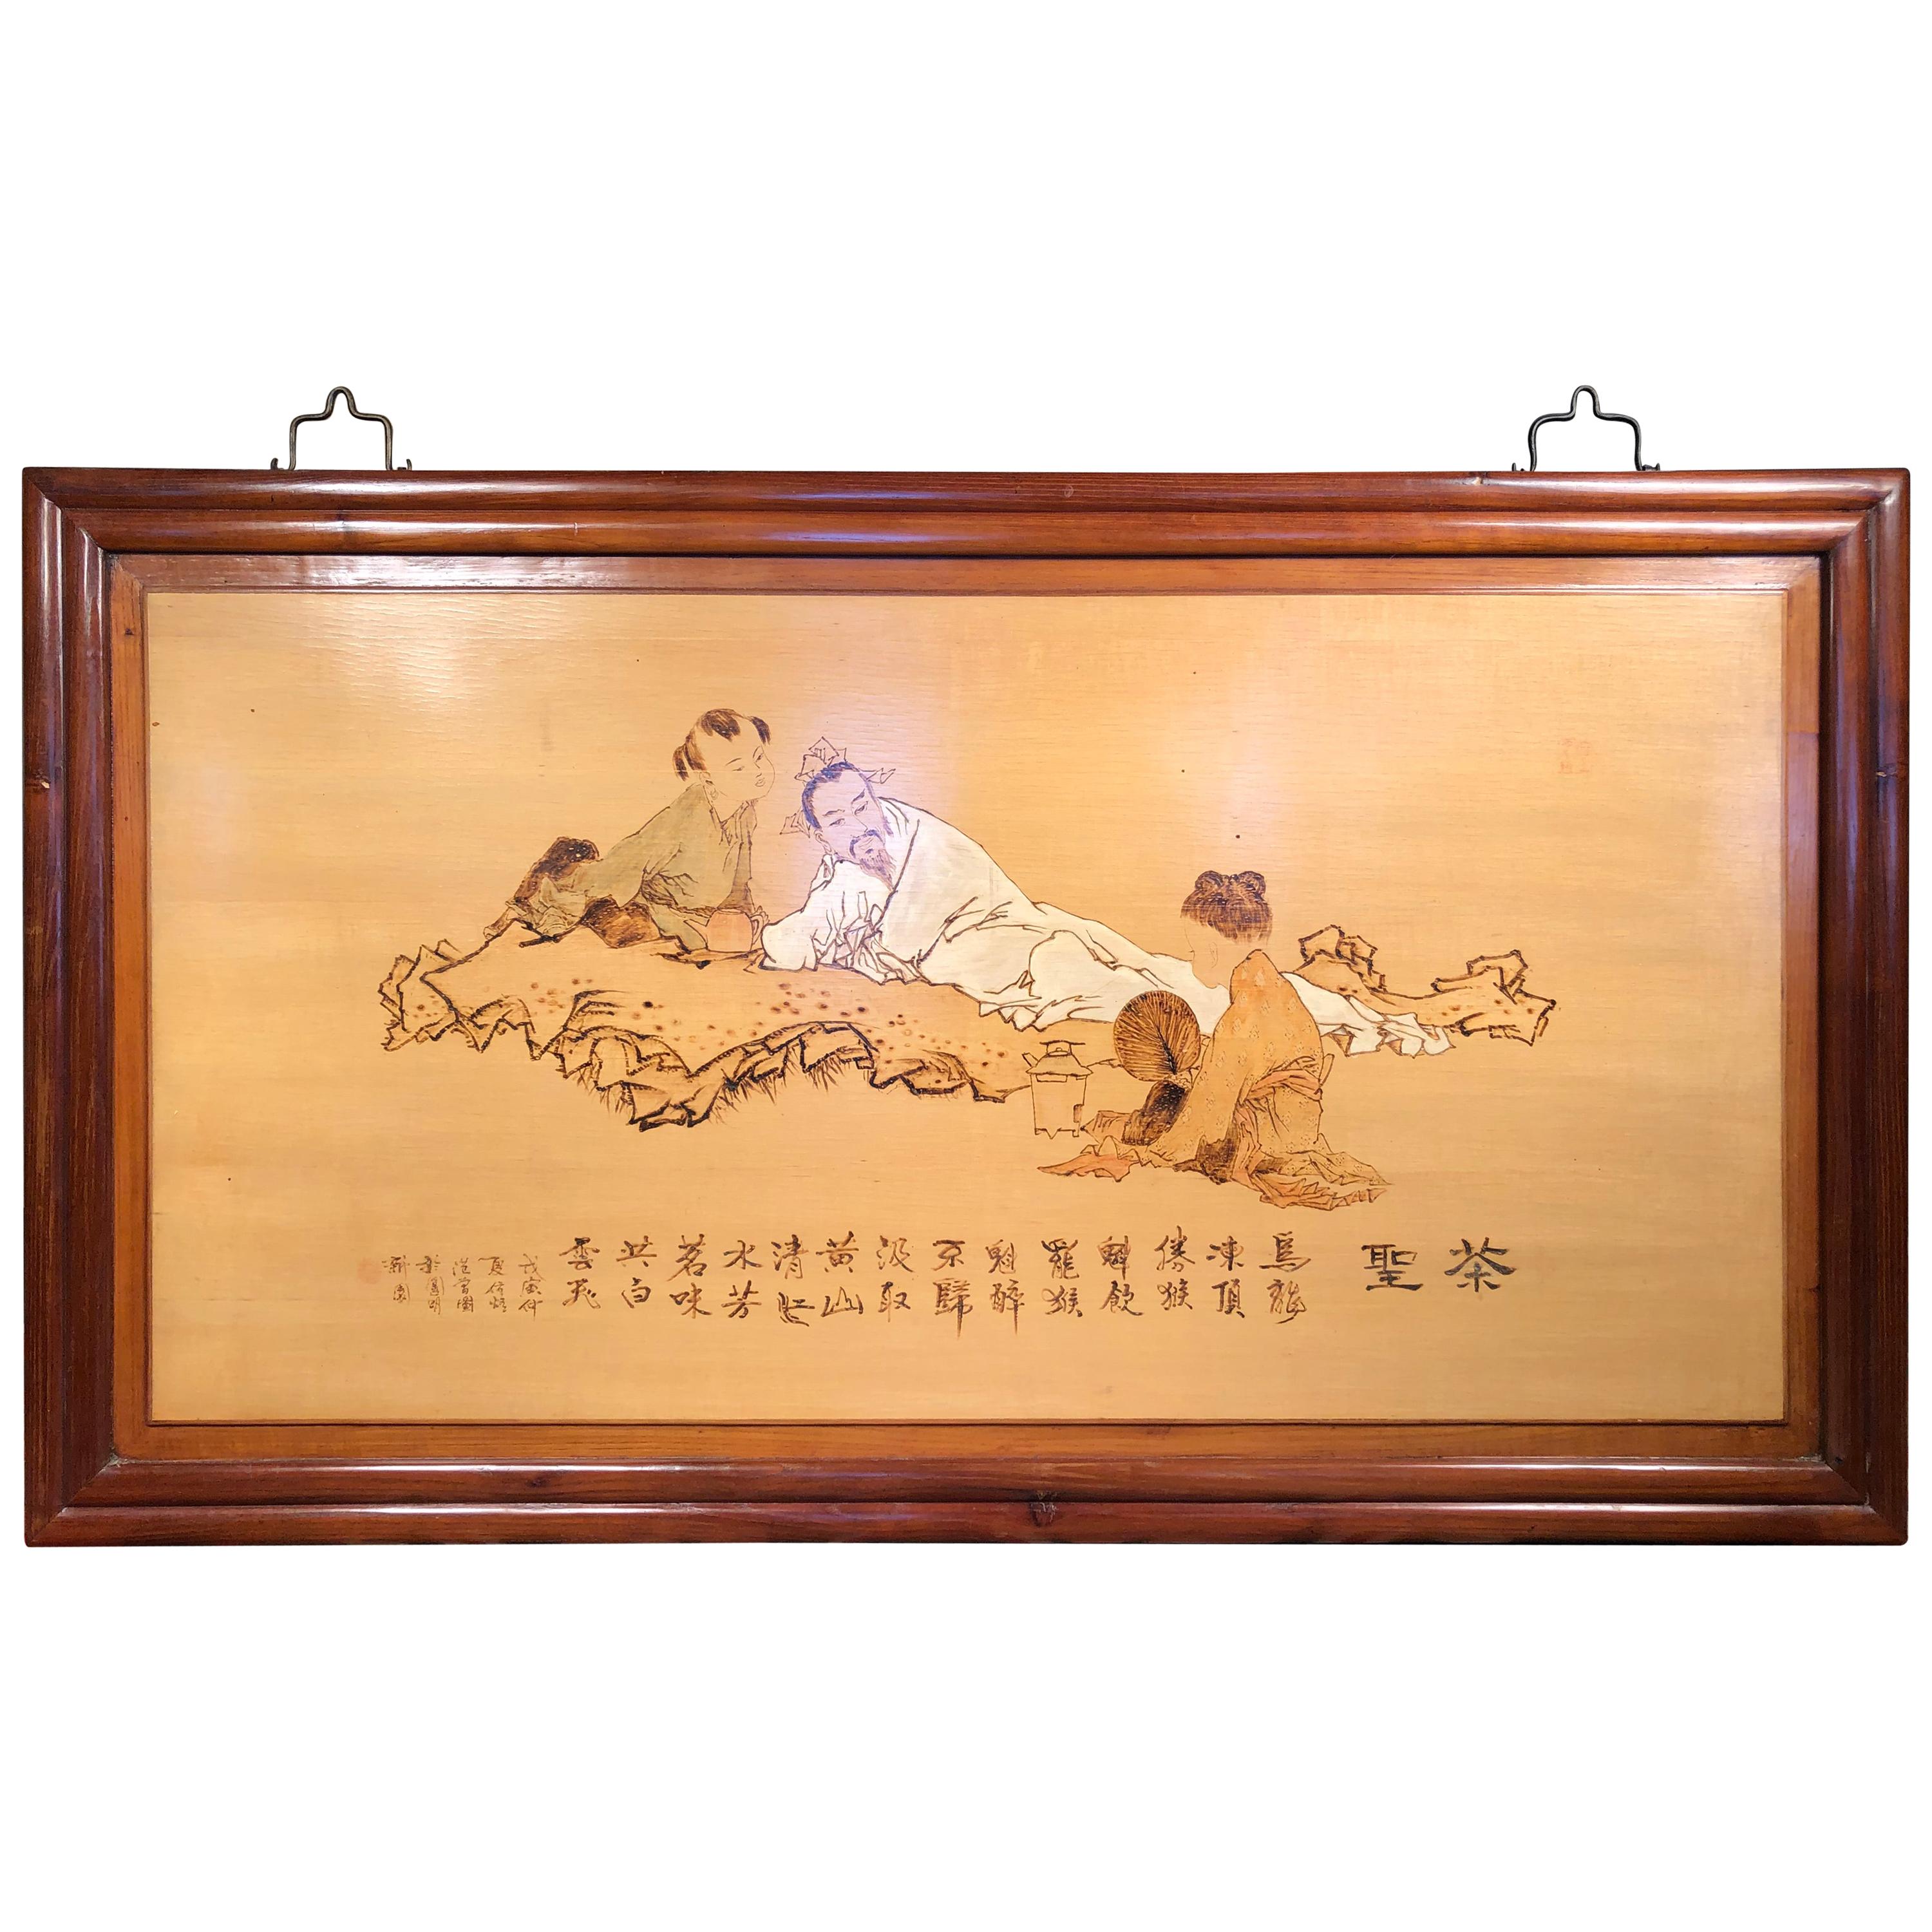 Important Chinese Pyrography Painting of “LUK YU” Famous Tang Dynasty Tea master For Sale